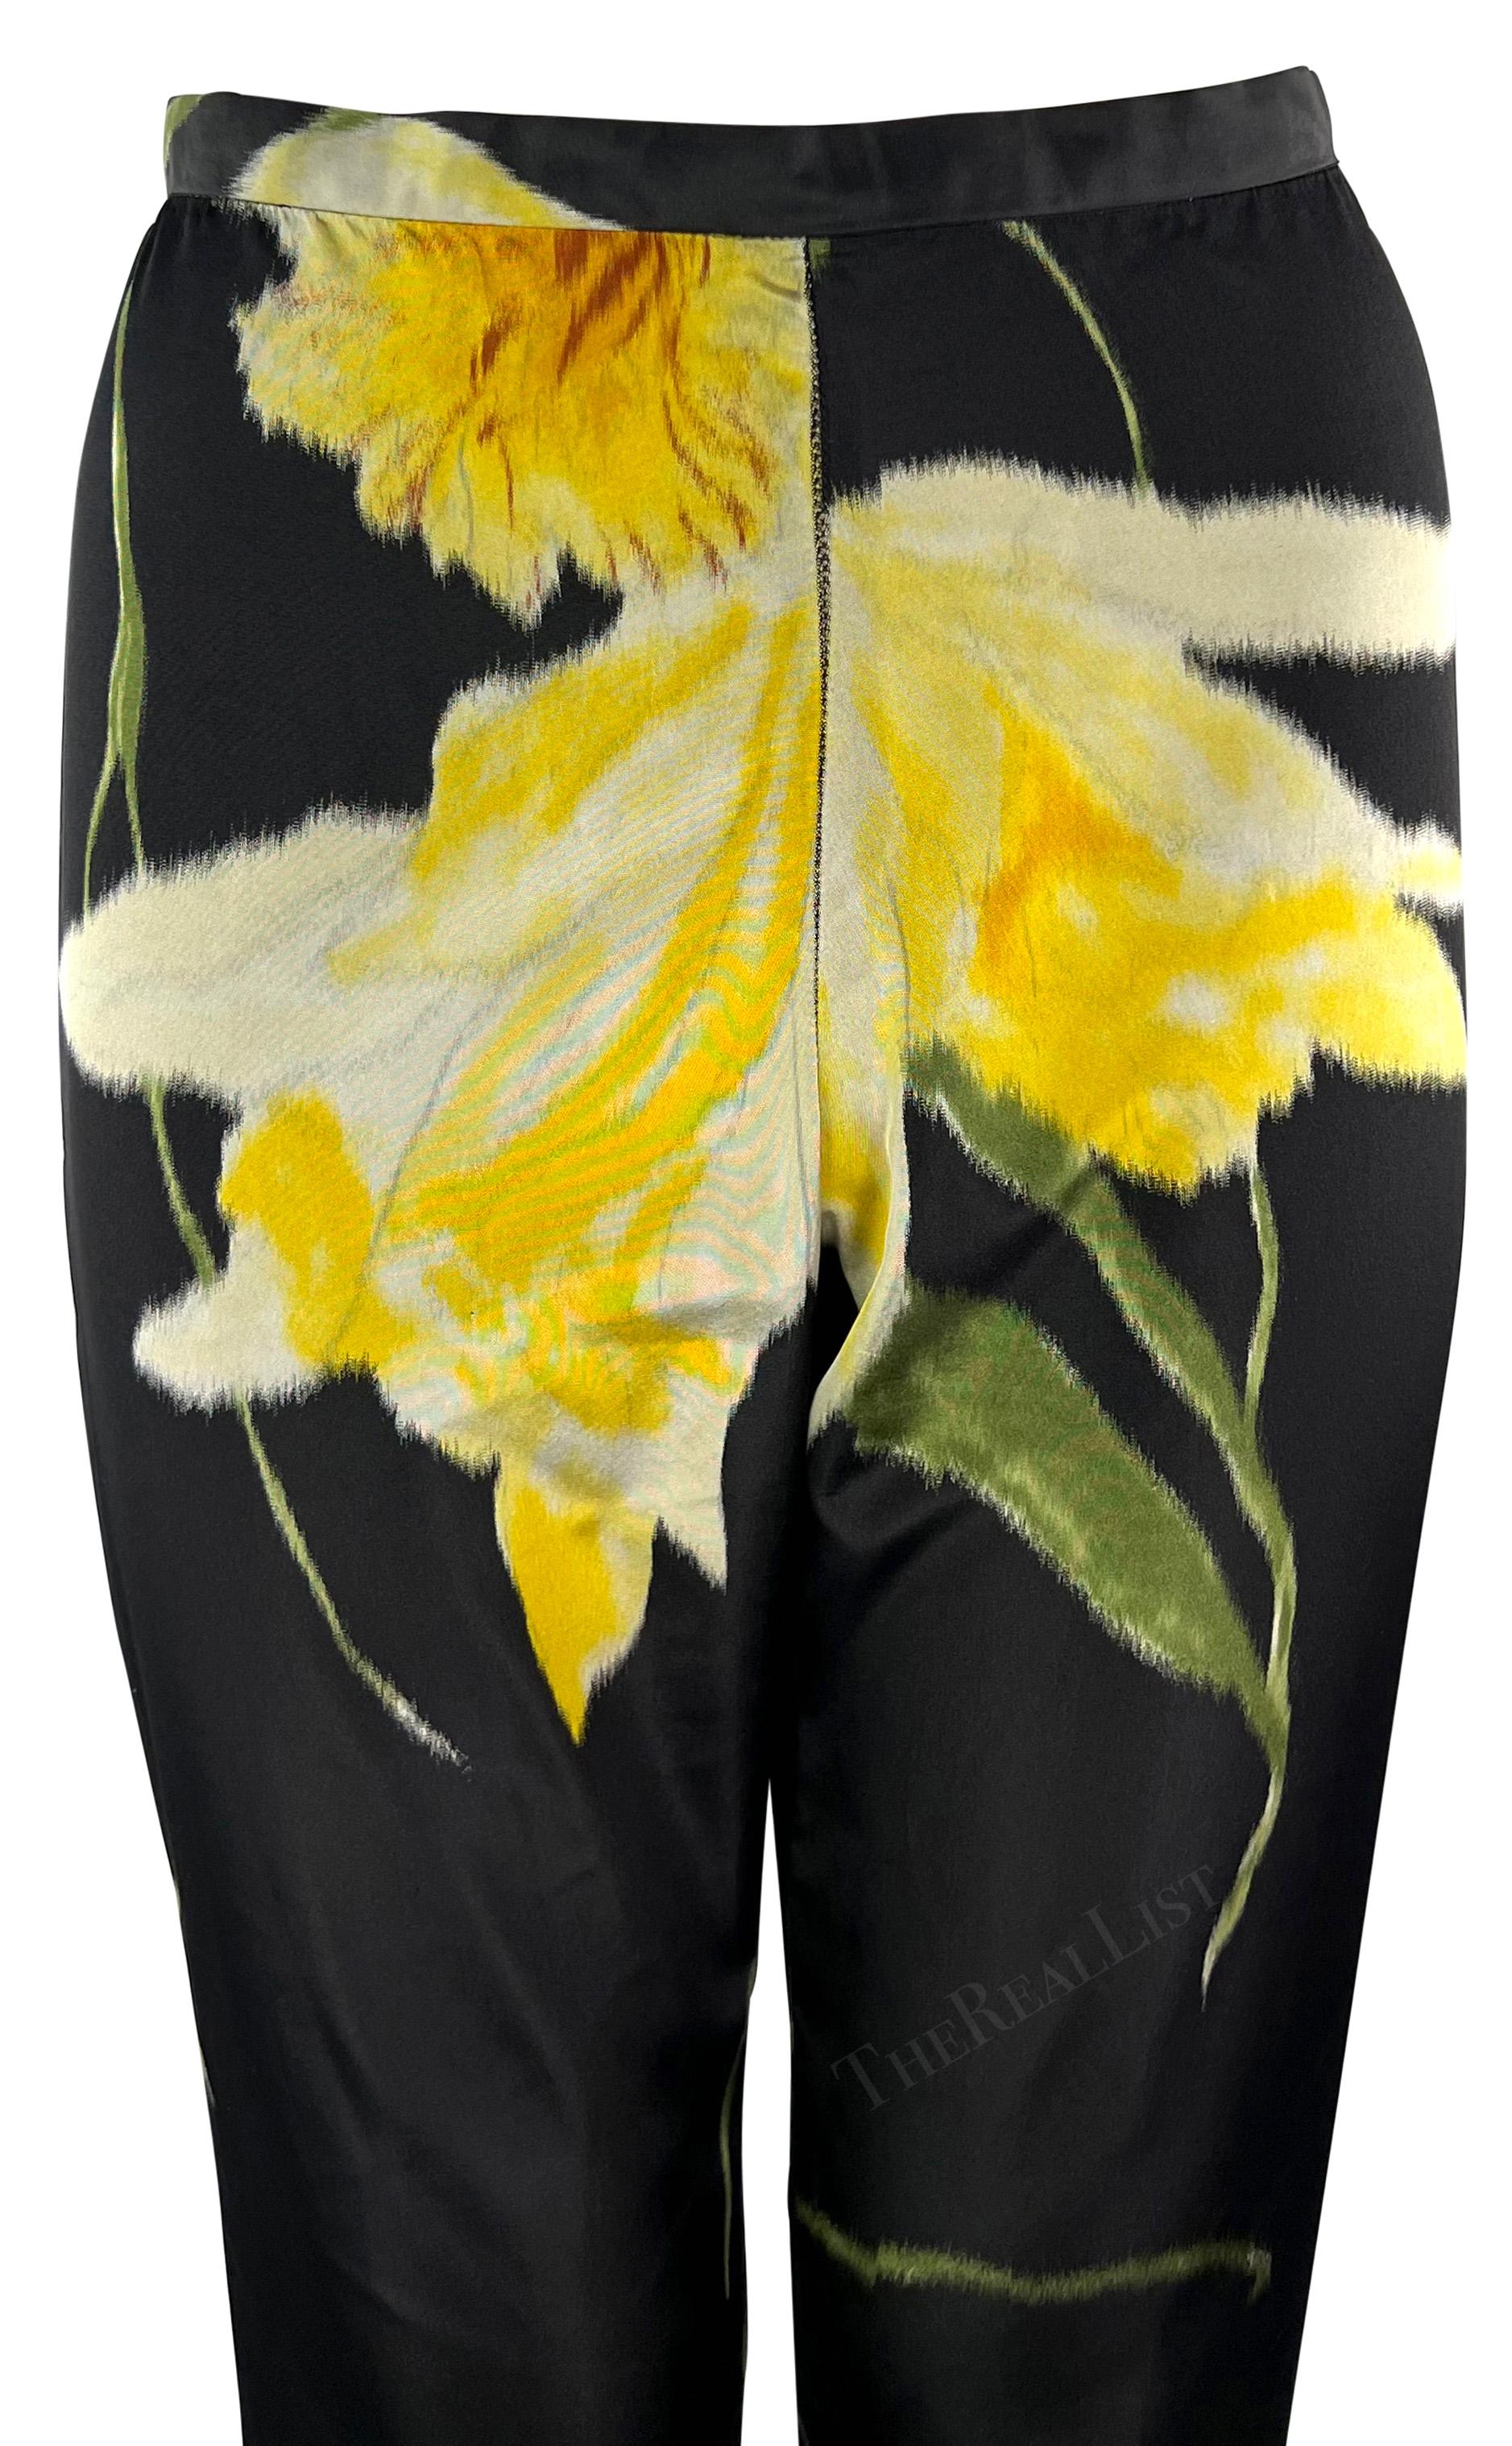 S/S 2000 Ralph Lauren Runway Black Silk Taffeta Yellow Floral Cigarette Pants In Excellent Condition For Sale In West Hollywood, CA